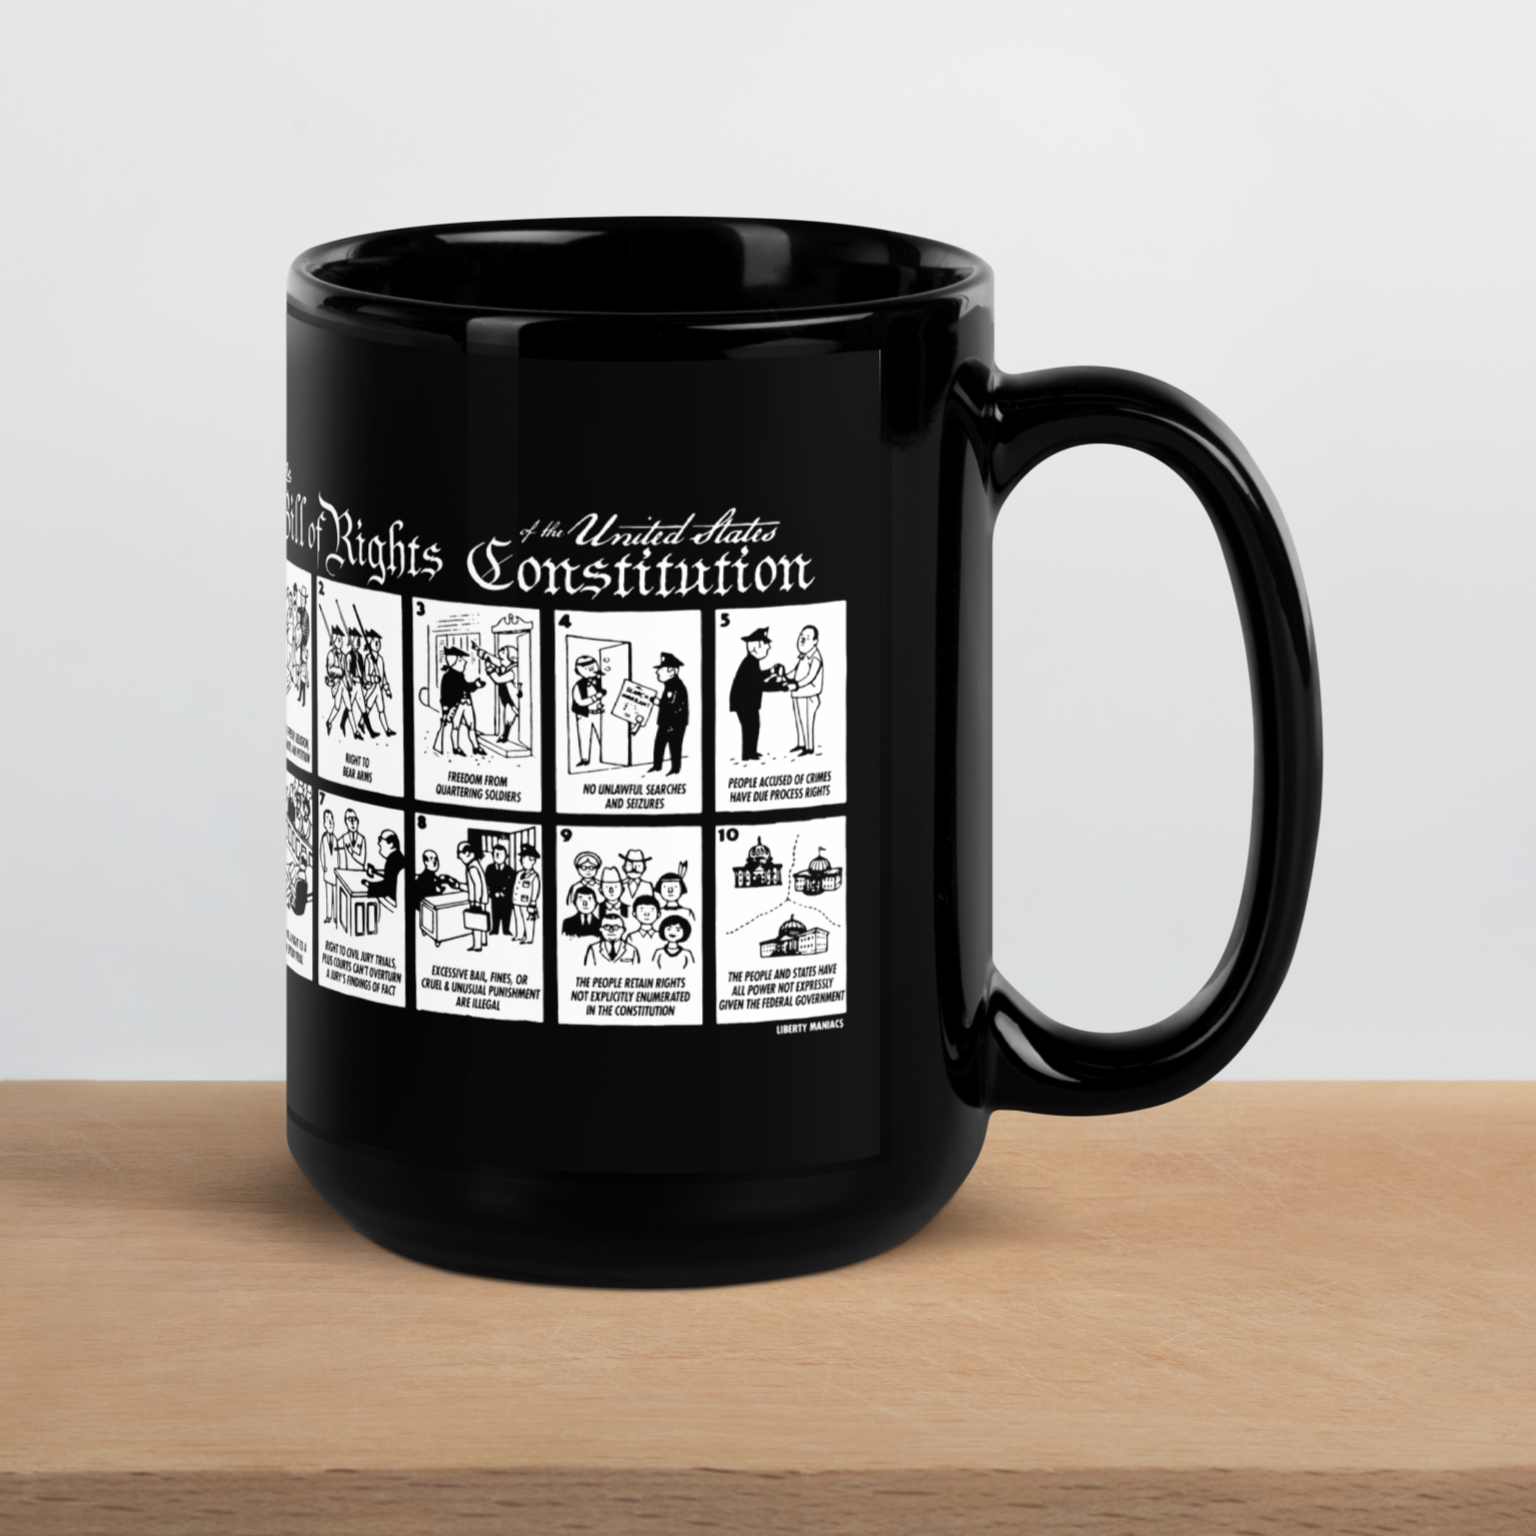 The Illustrated Bill of Rights Coffee Mug